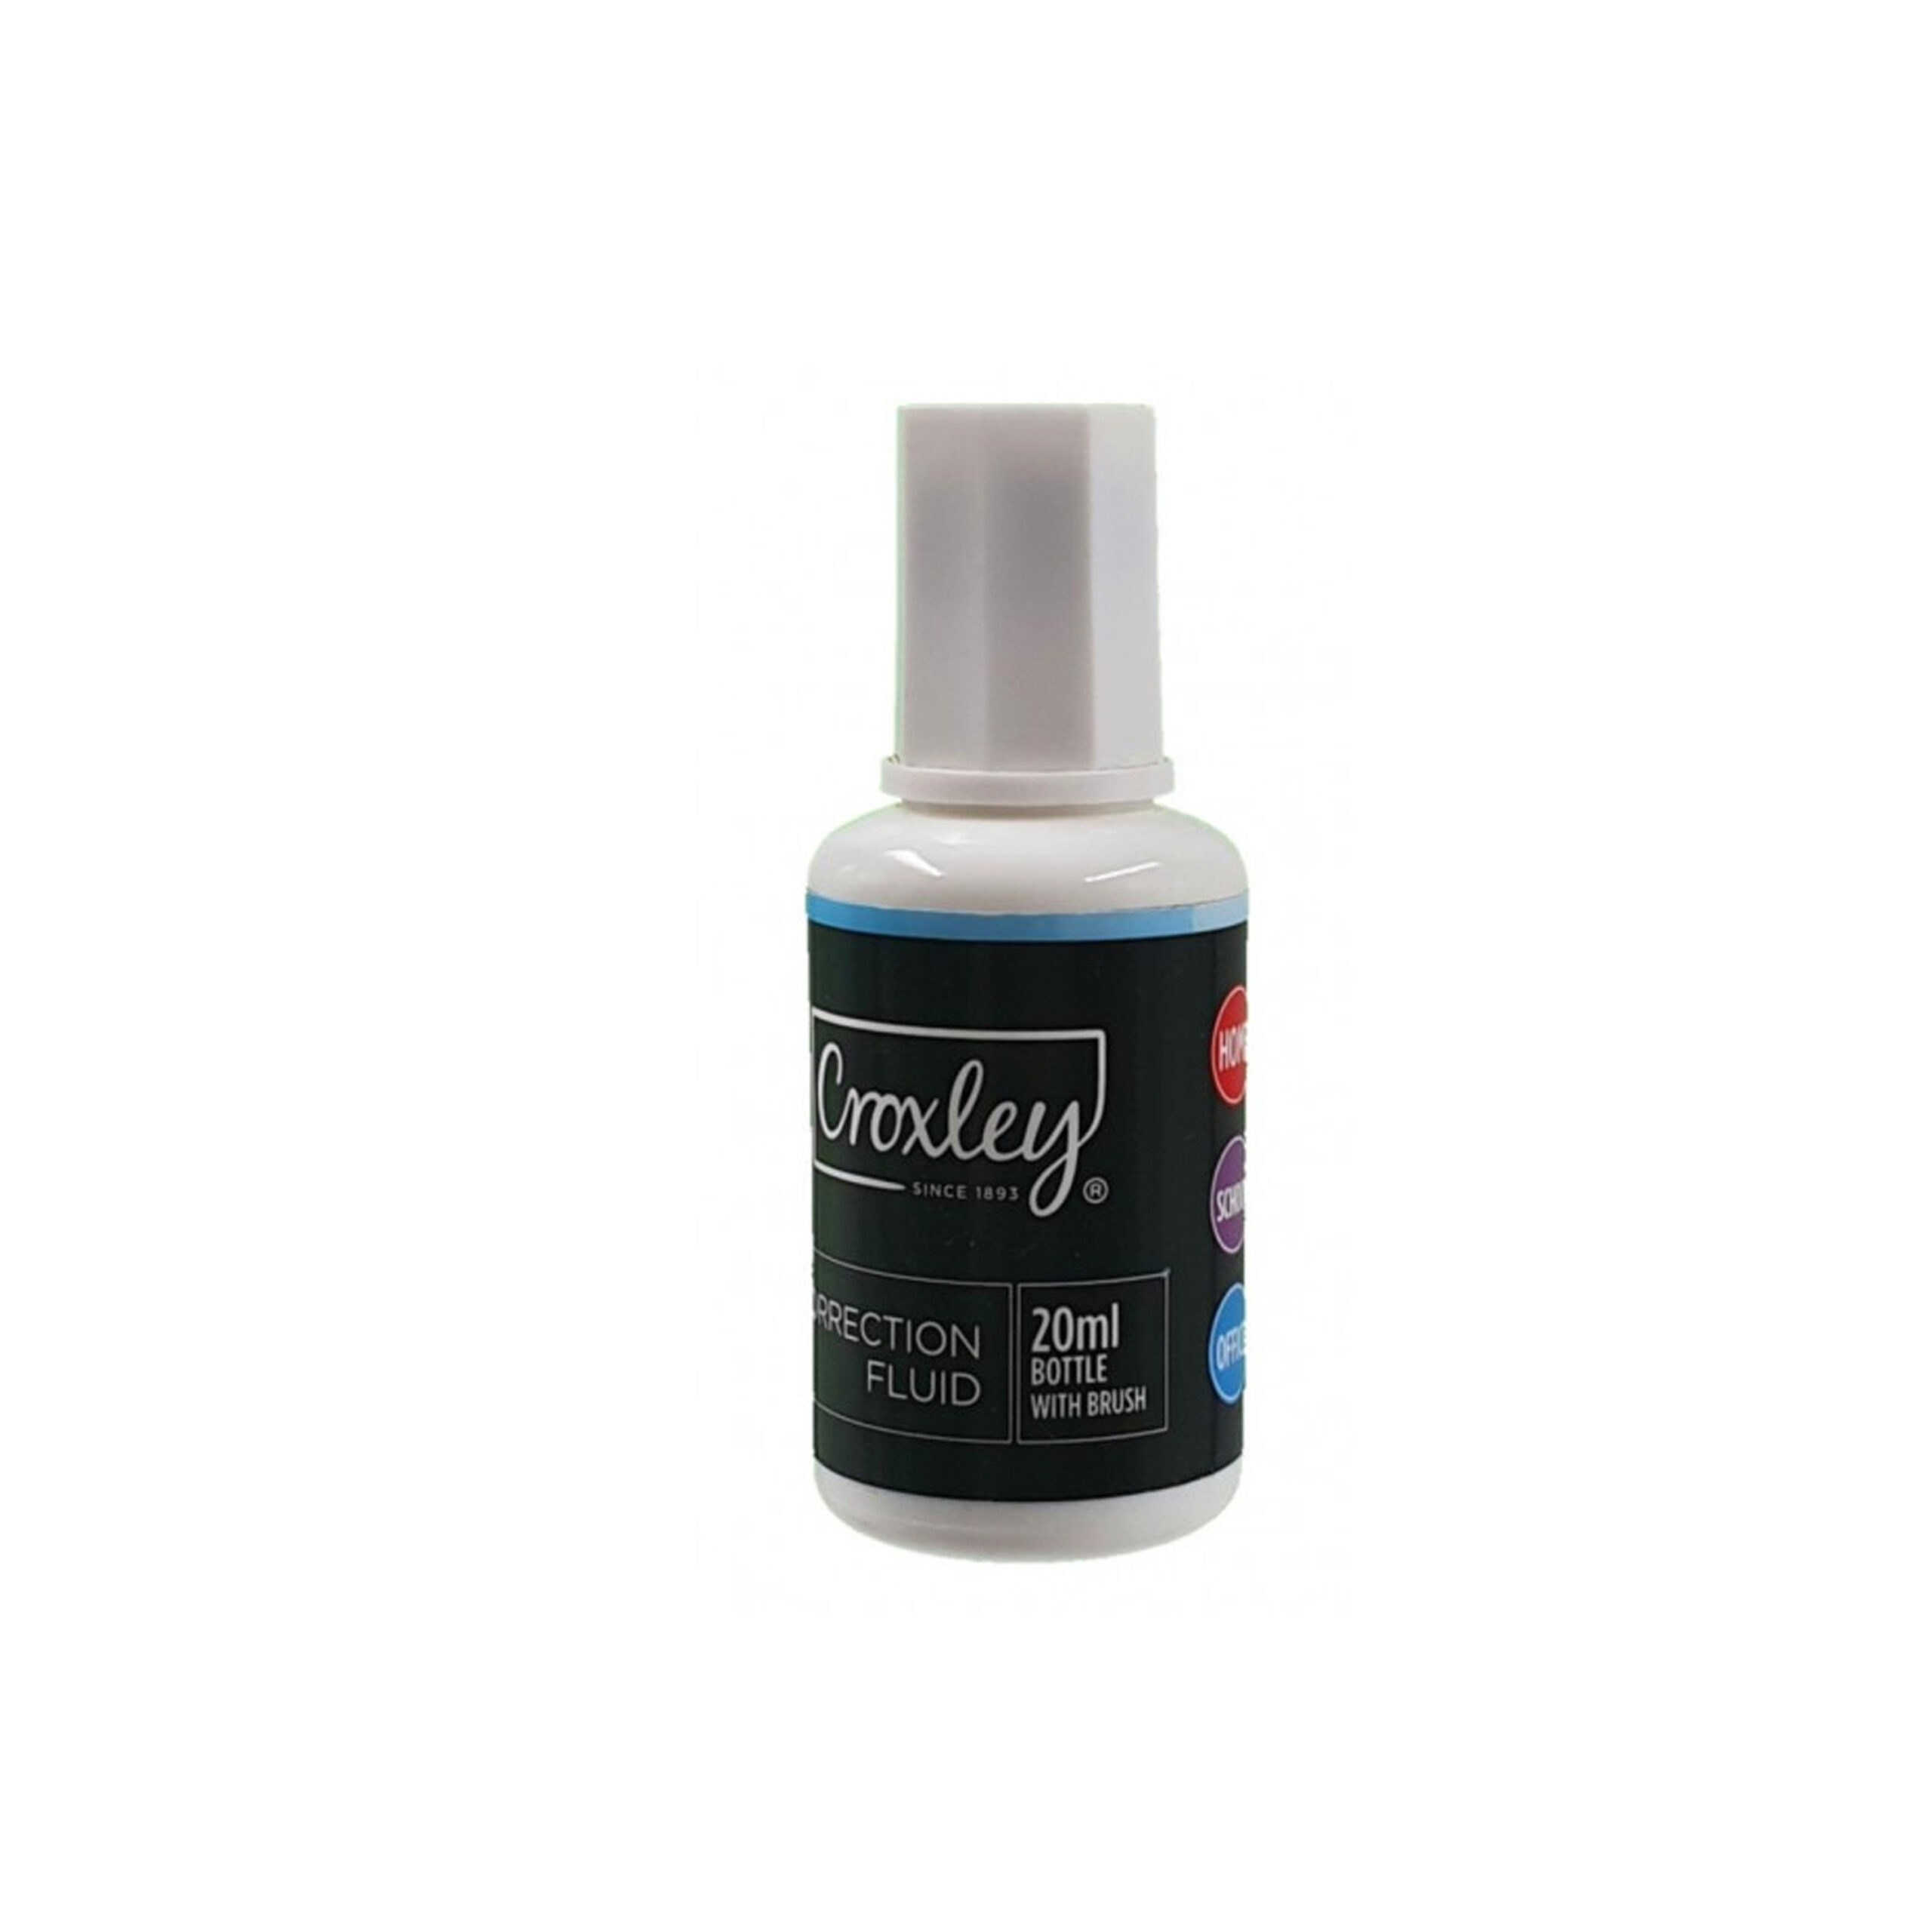 CROXLEY CORRECTION FLUID (TIPPEX) WITH BRUSH  20ml